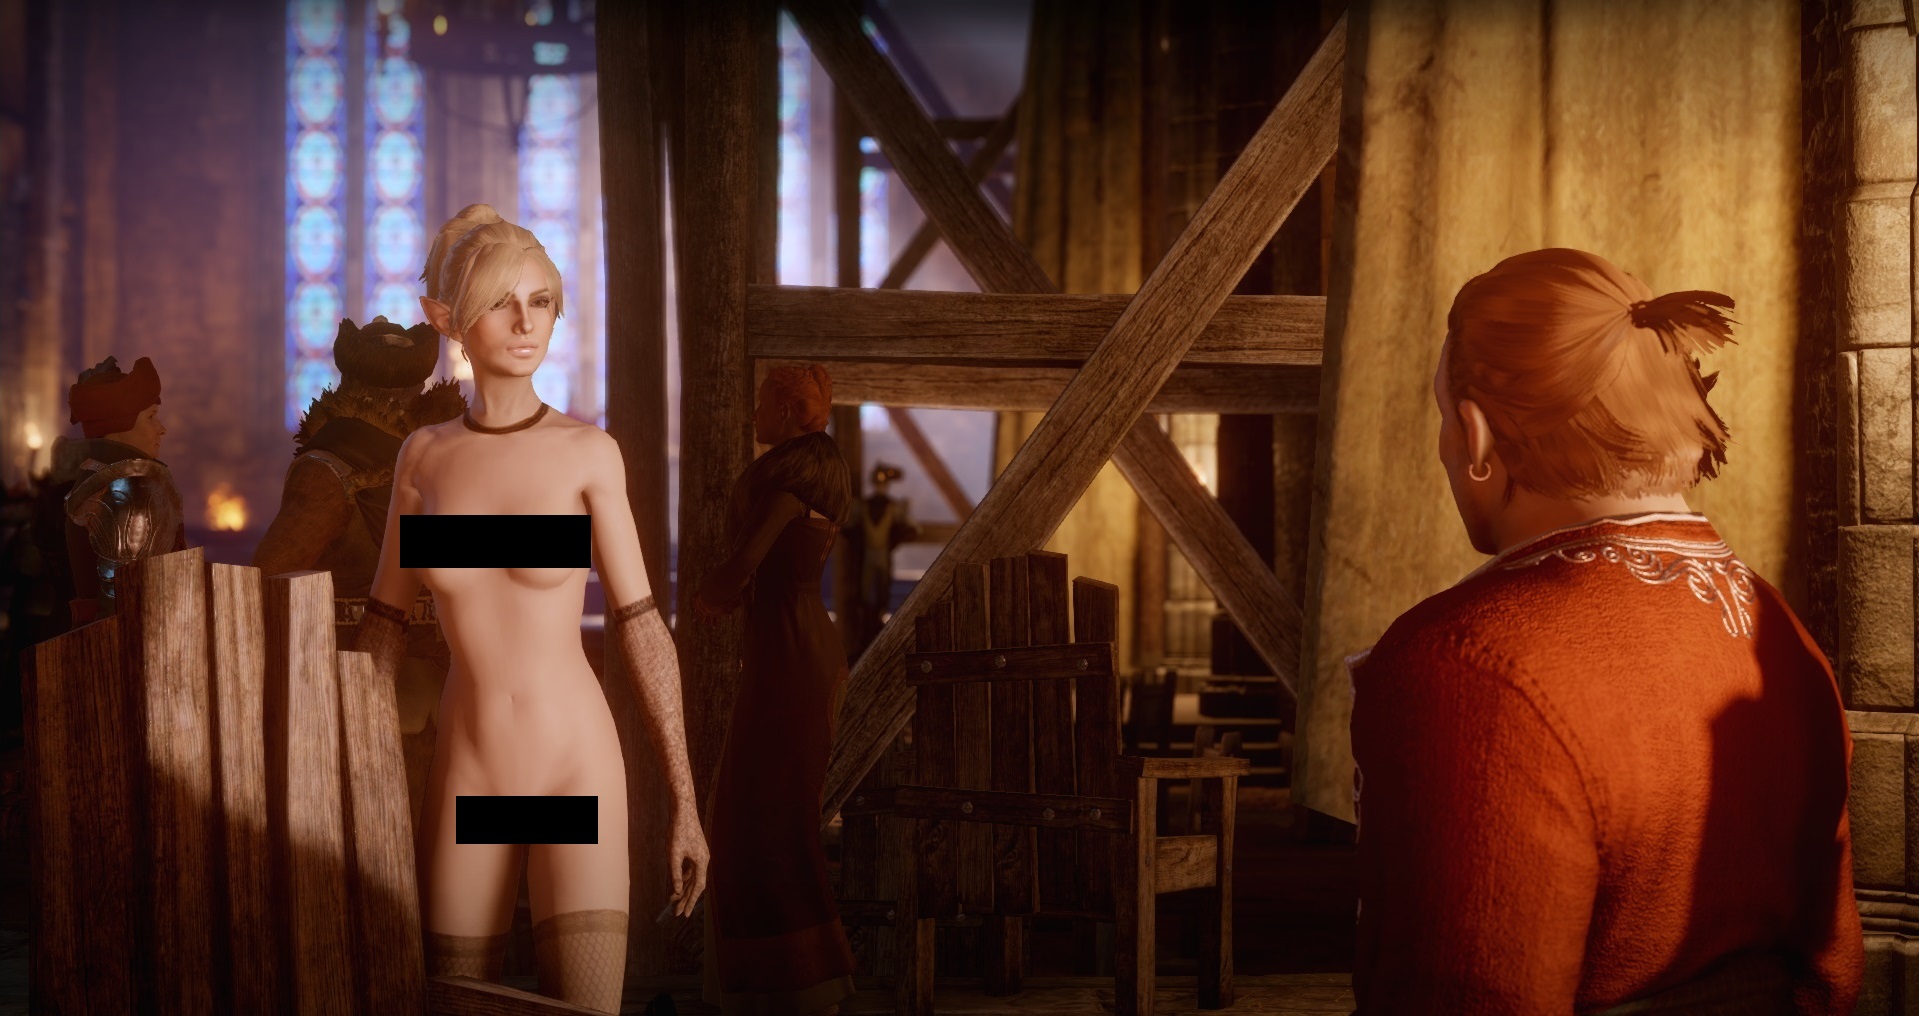 bryan storms share dragon age inquisition nude mods photos